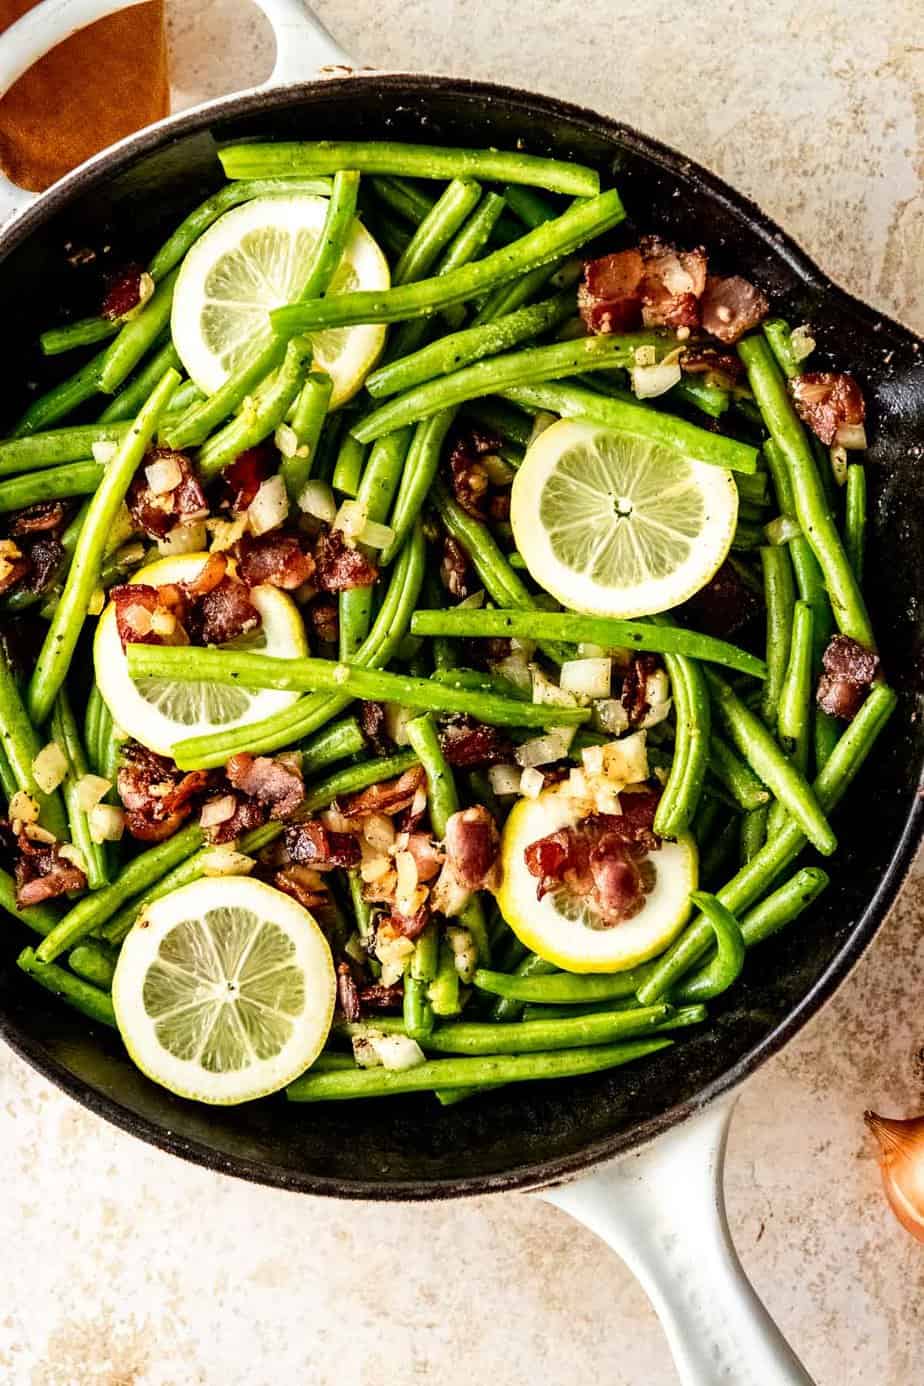 A skillet with green beans, onion, and bacon garnished with lemon slices.